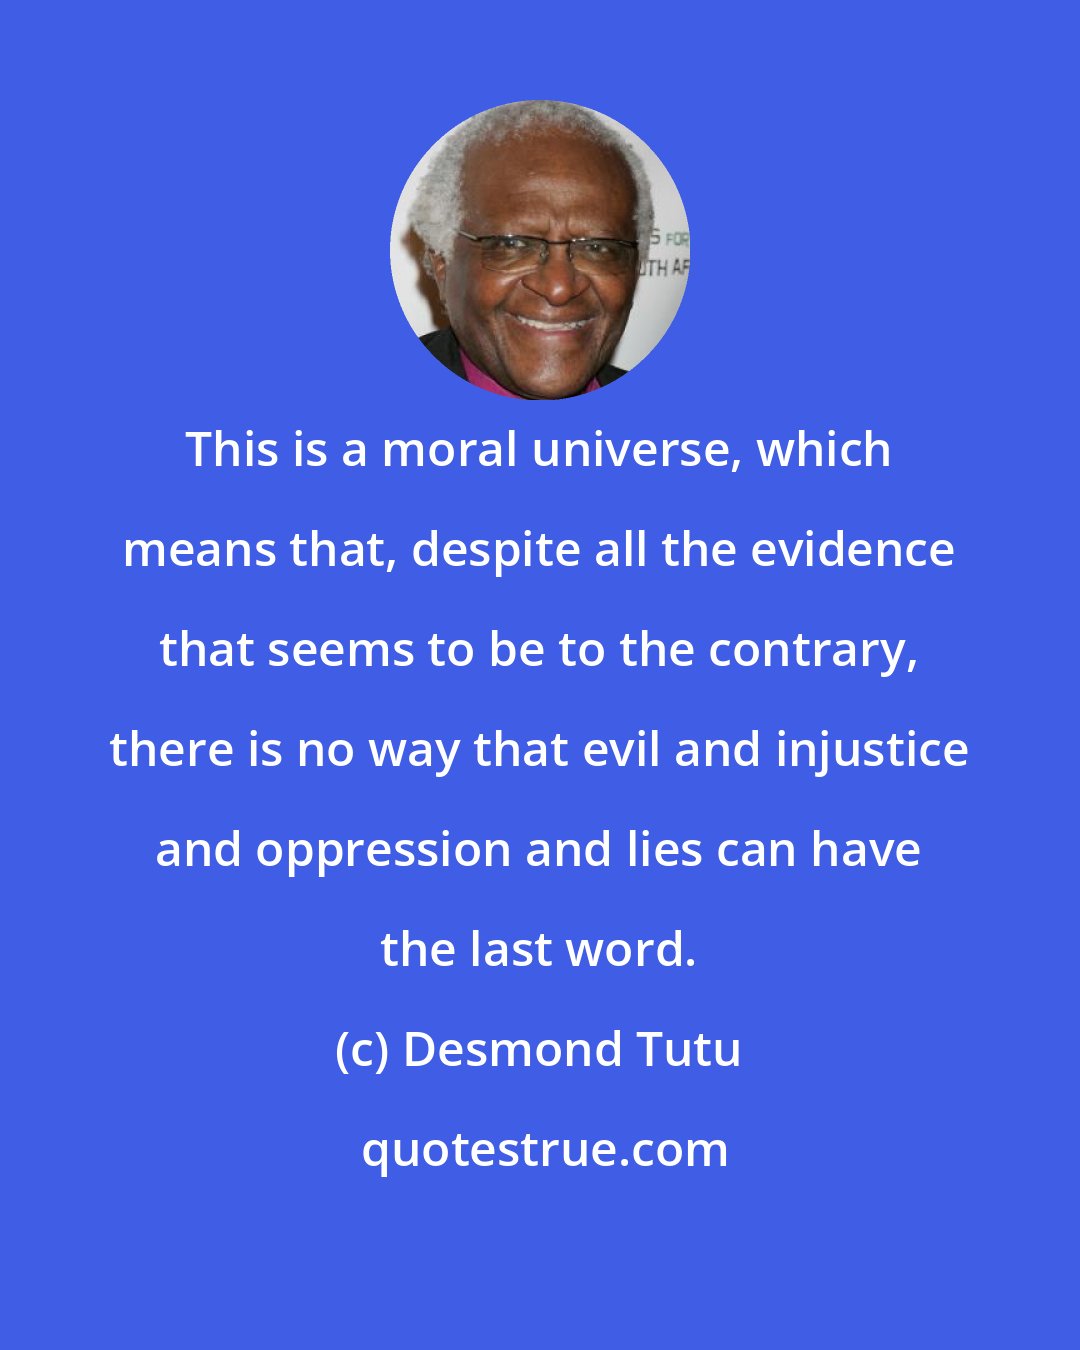 Desmond Tutu: This is a moral universe, which means that, despite all the evidence that seems to be to the contrary, there is no way that evil and injustice and oppression and lies can have the last word.